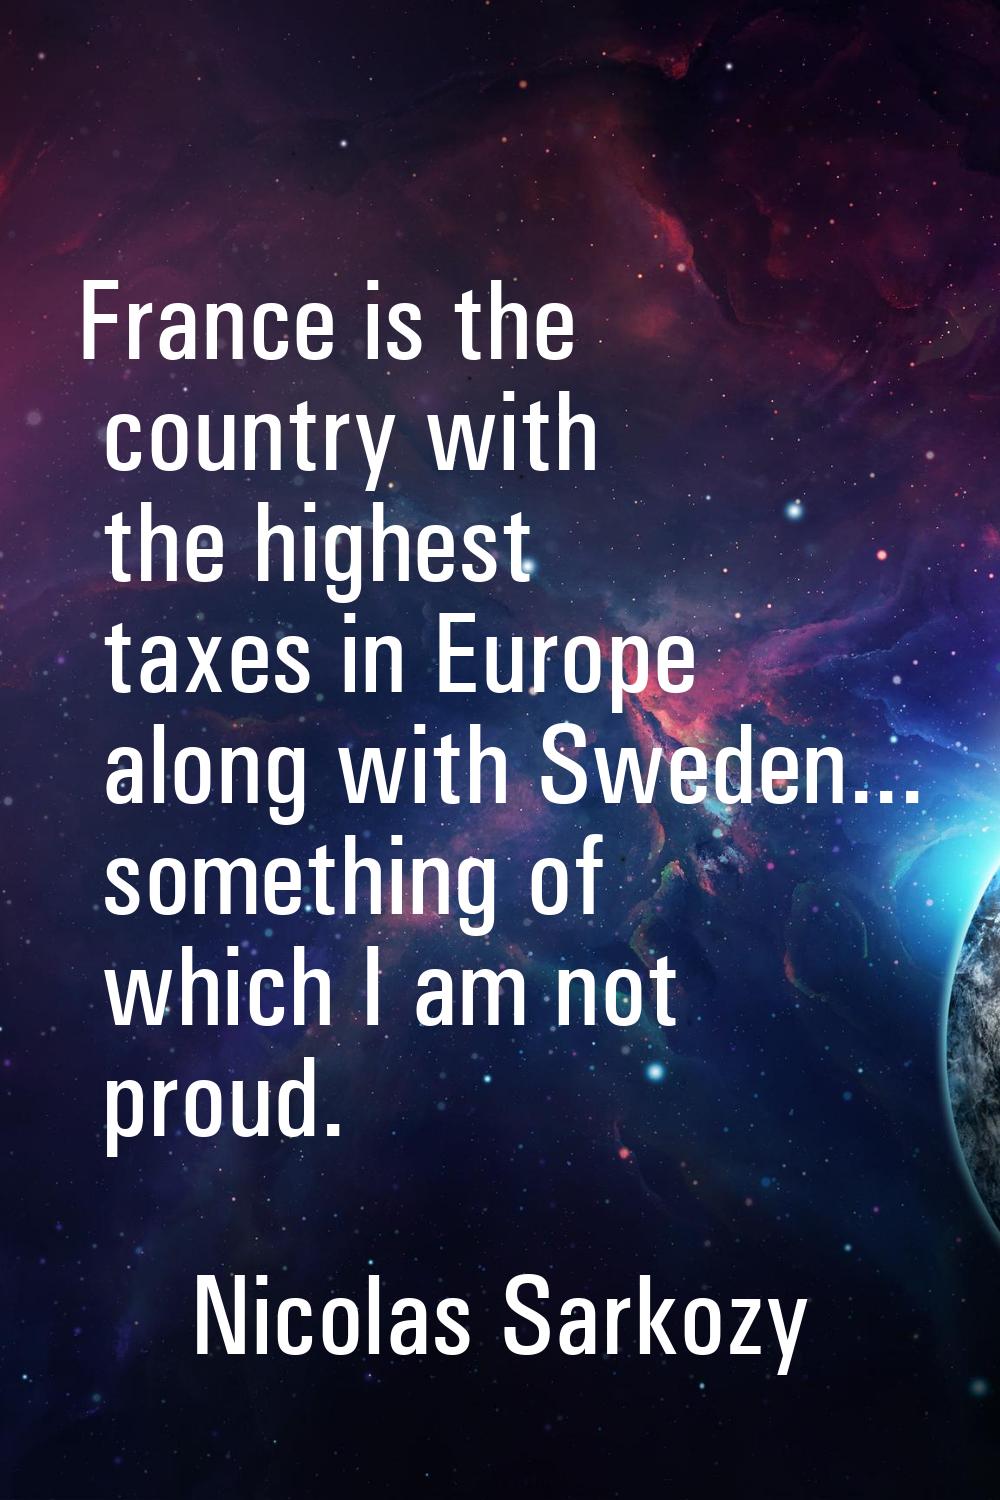 France is the country with the highest taxes in Europe along with Sweden... something of which I am